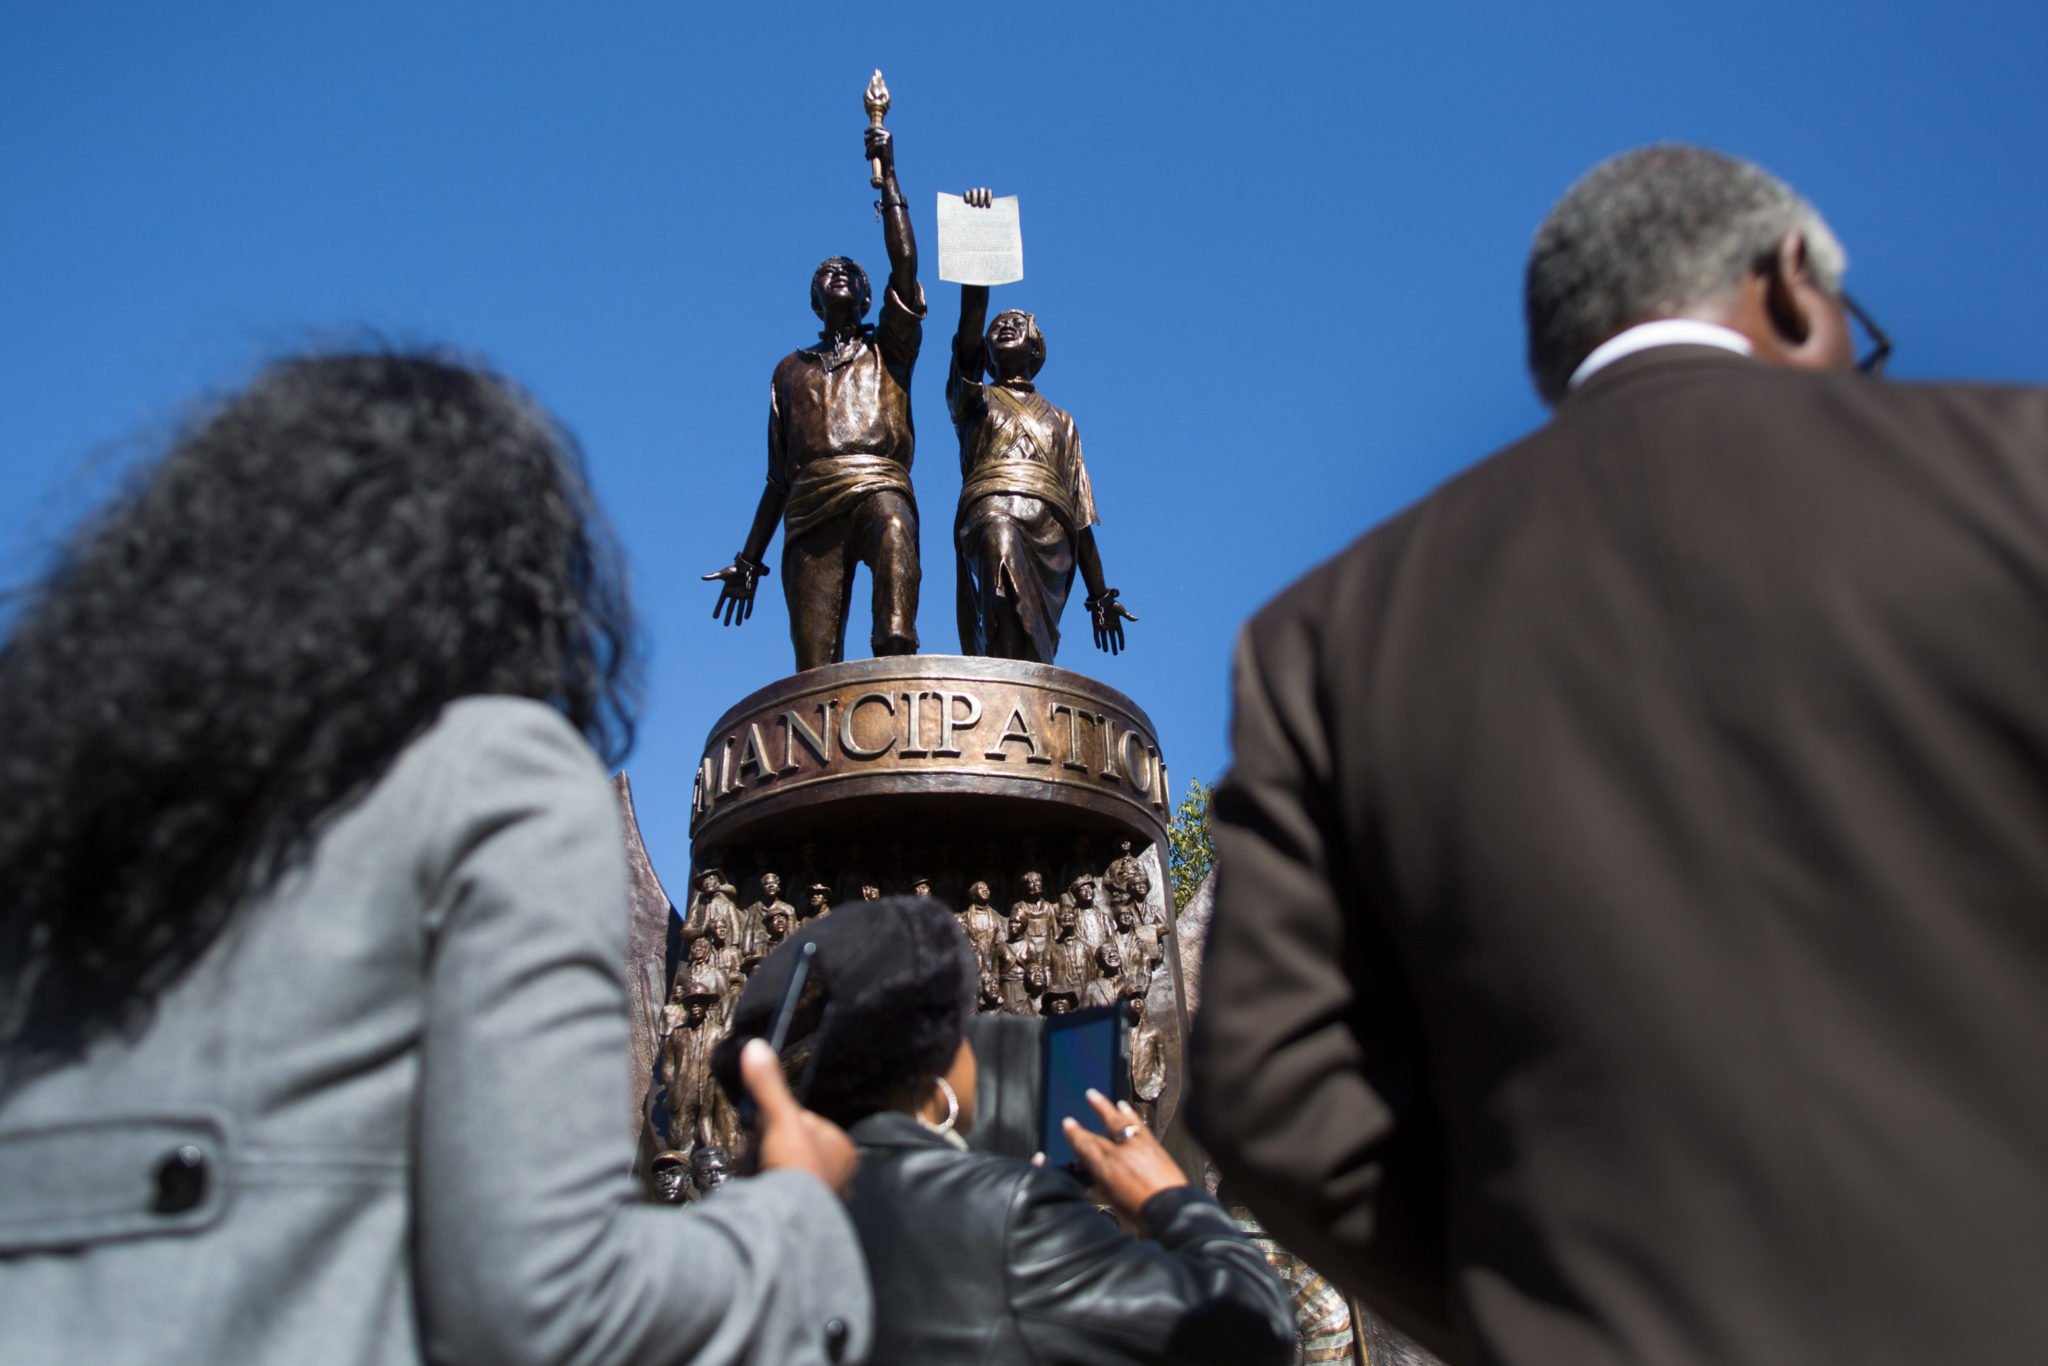 The Black history monument, unveiled Saturday morning, was more than 20 years in the making.